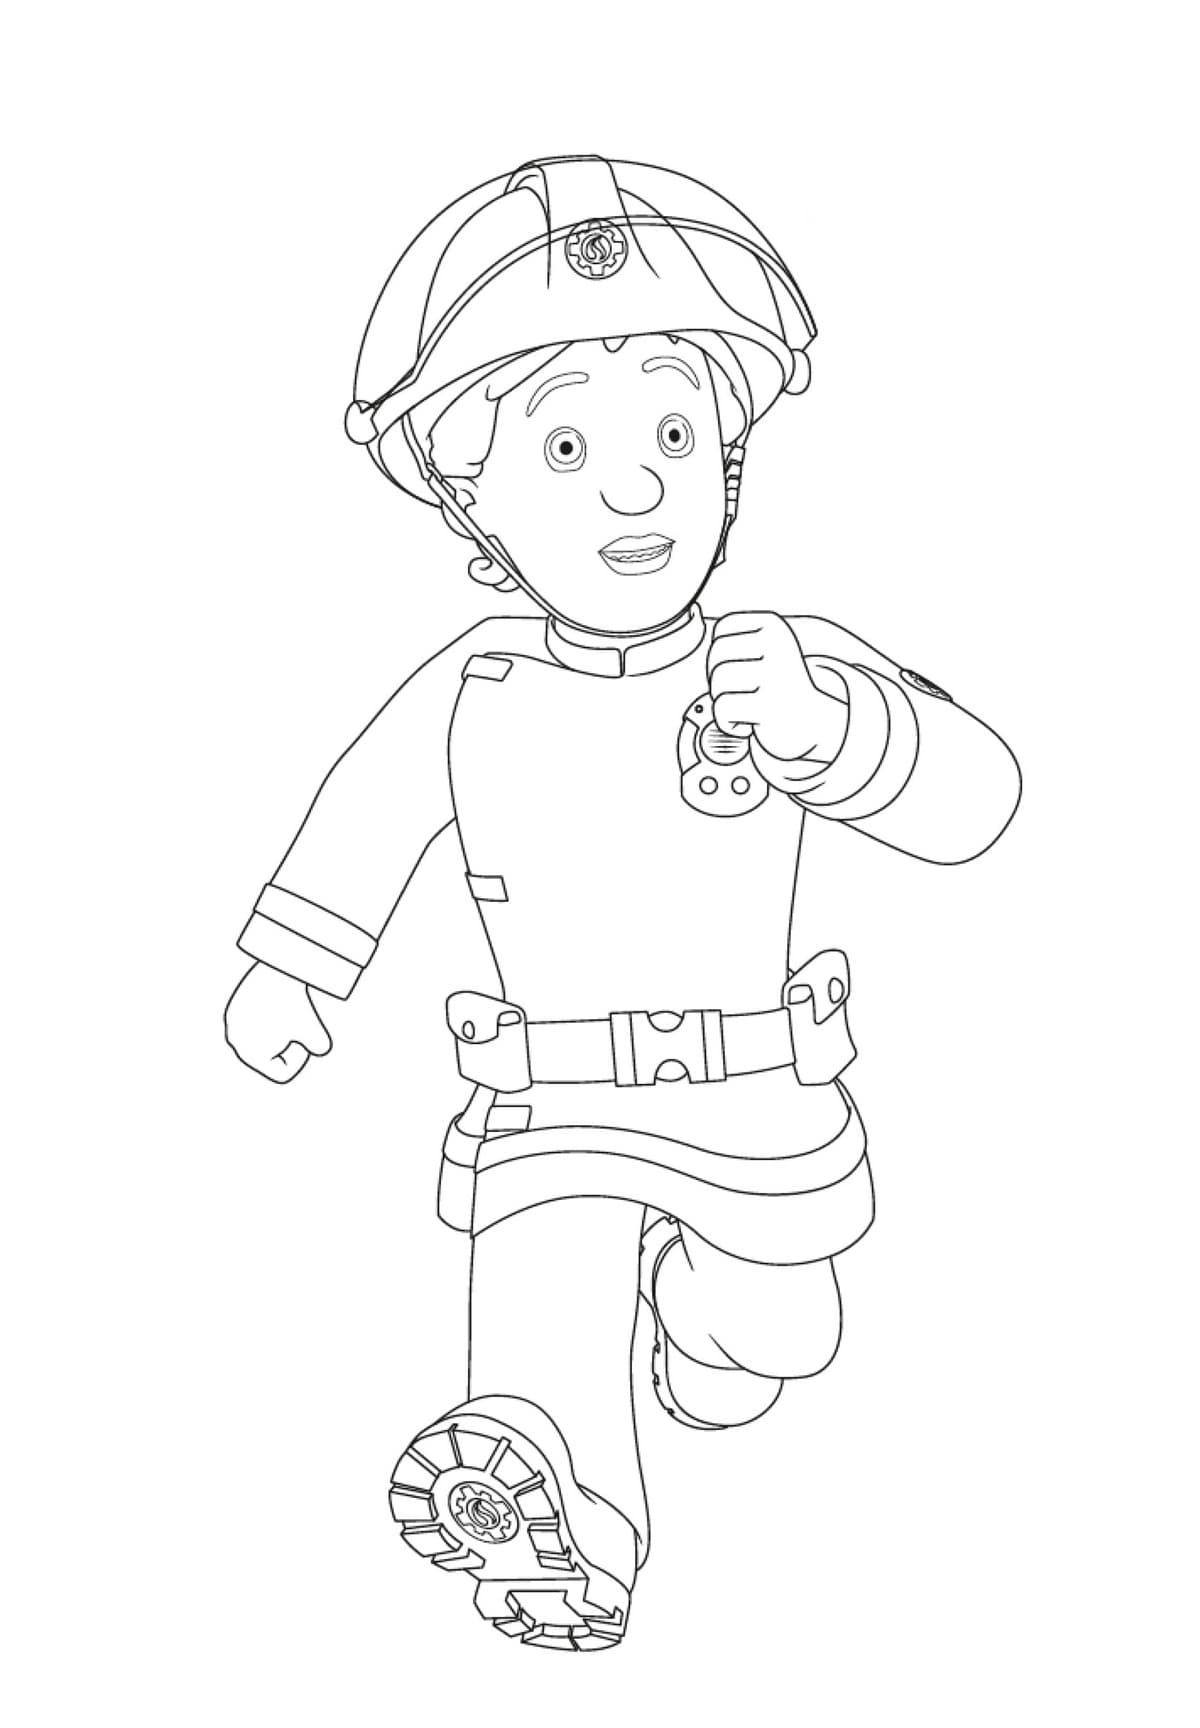 Coloring Pages Fireman Sam . 100 Coloring Pages Print for kids